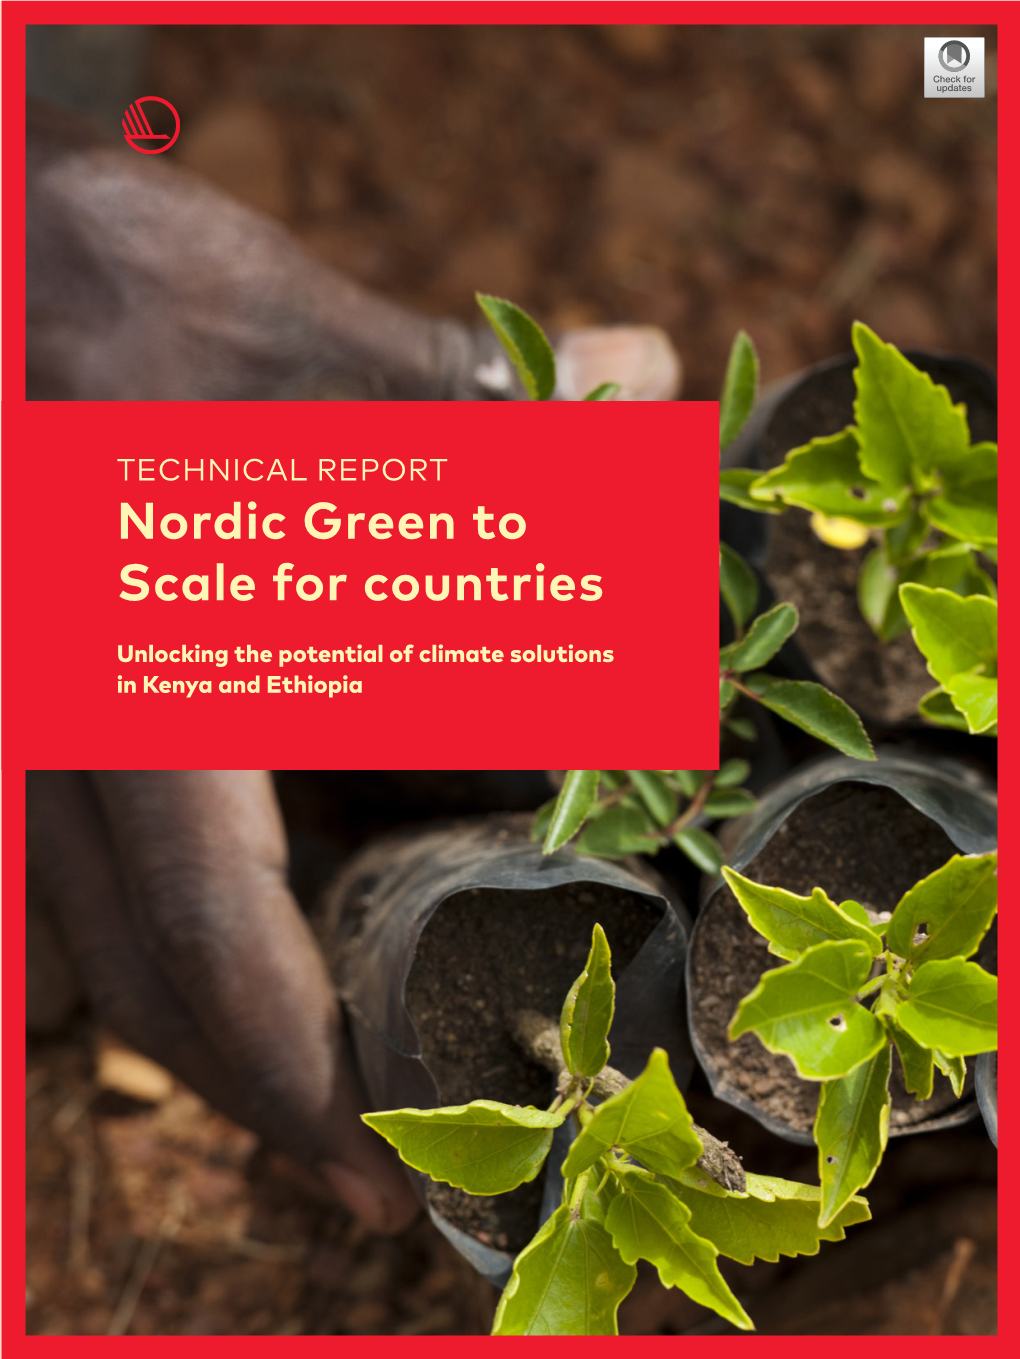 TECHNICAL REPORT Nordic Green to Scale for Countries